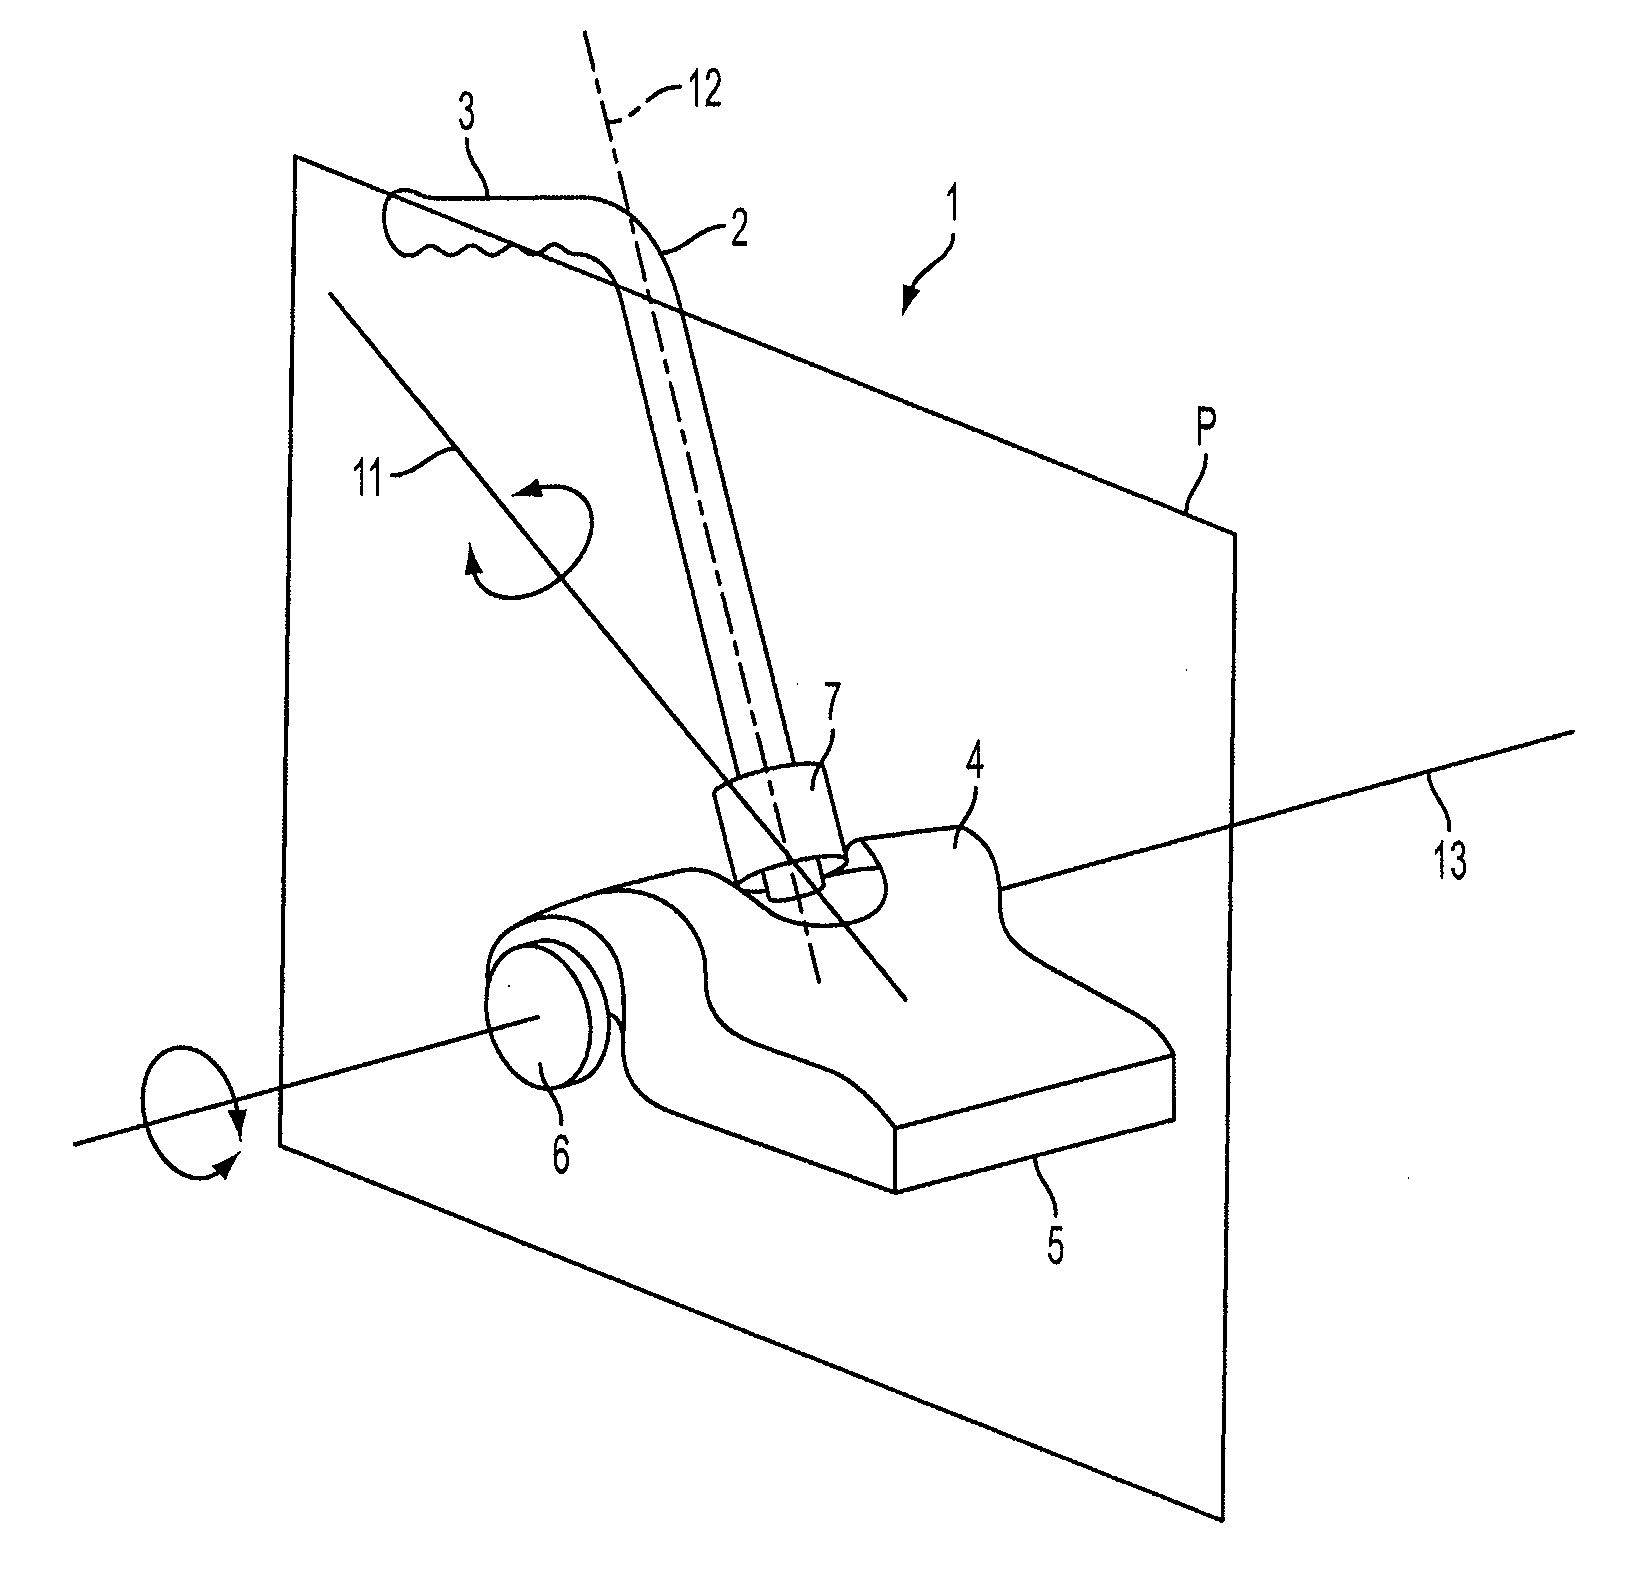 Method and apparatus for assisting pivot motion of a handle in a floor treatment device